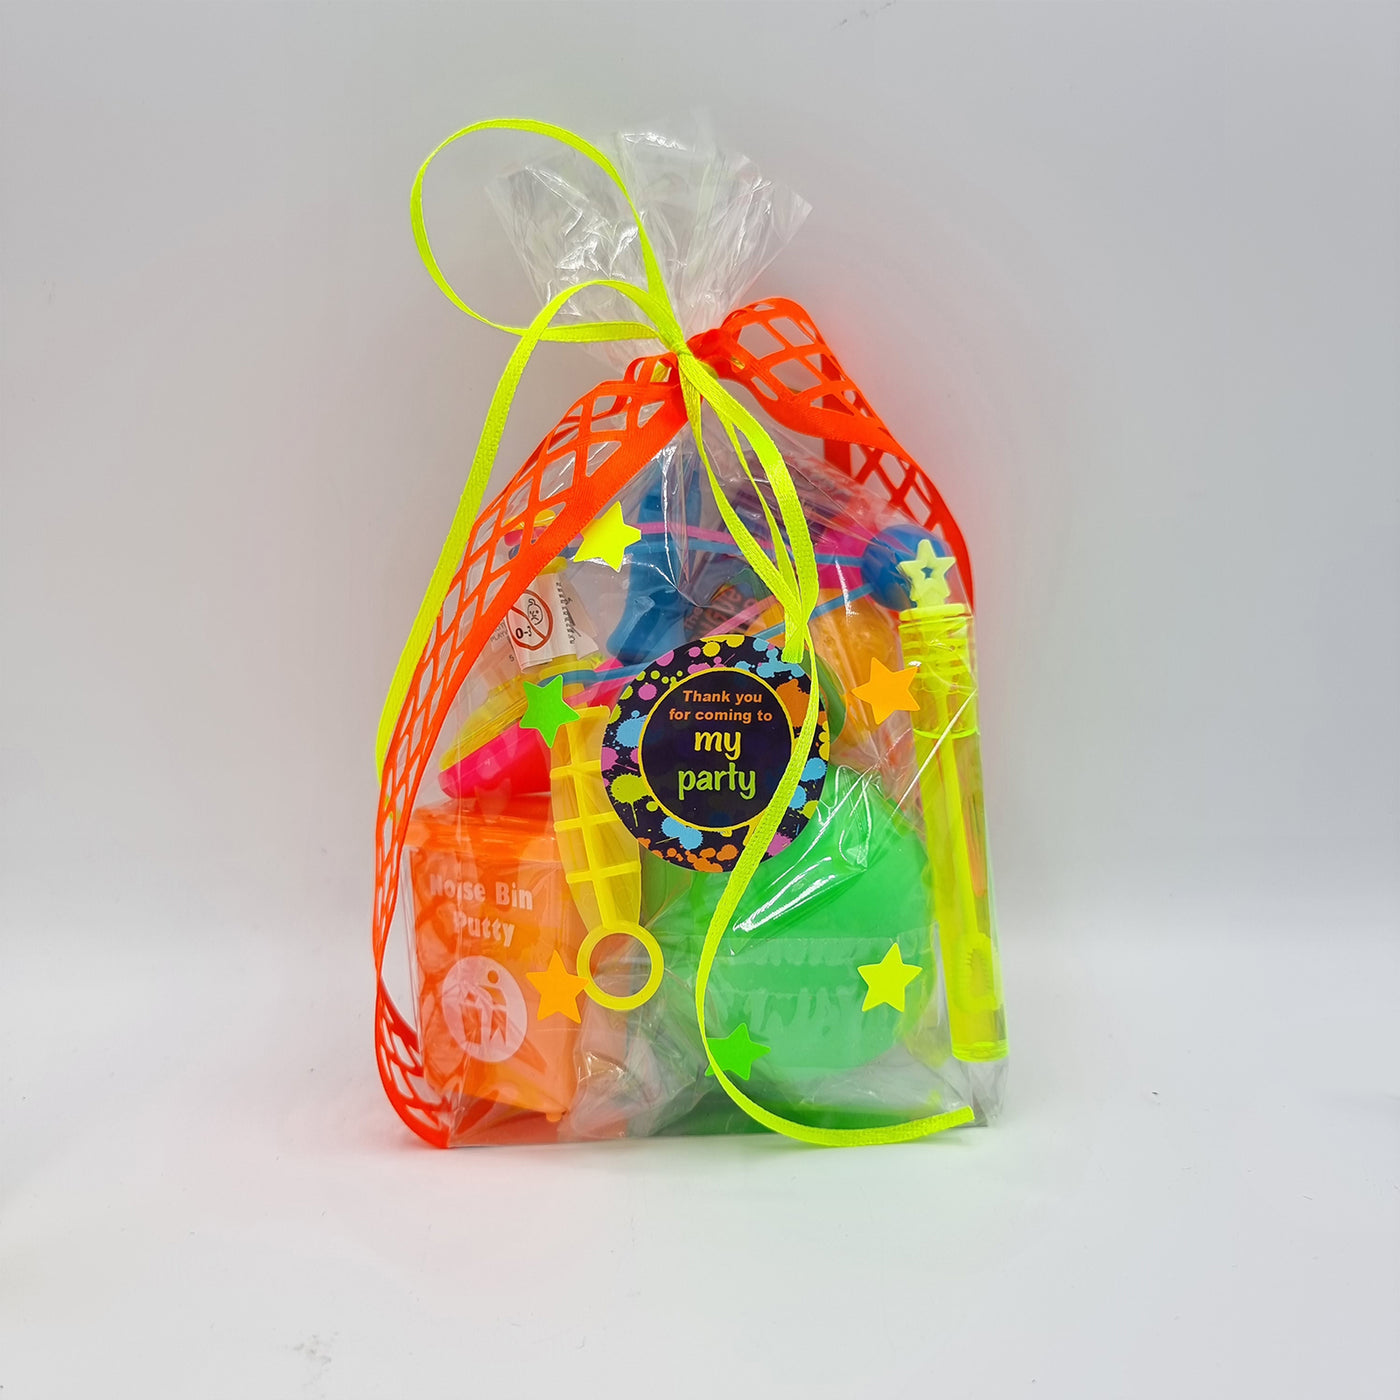 Children Pre Filled Birthday Neon Glow Party Bags With Toys And Candy.